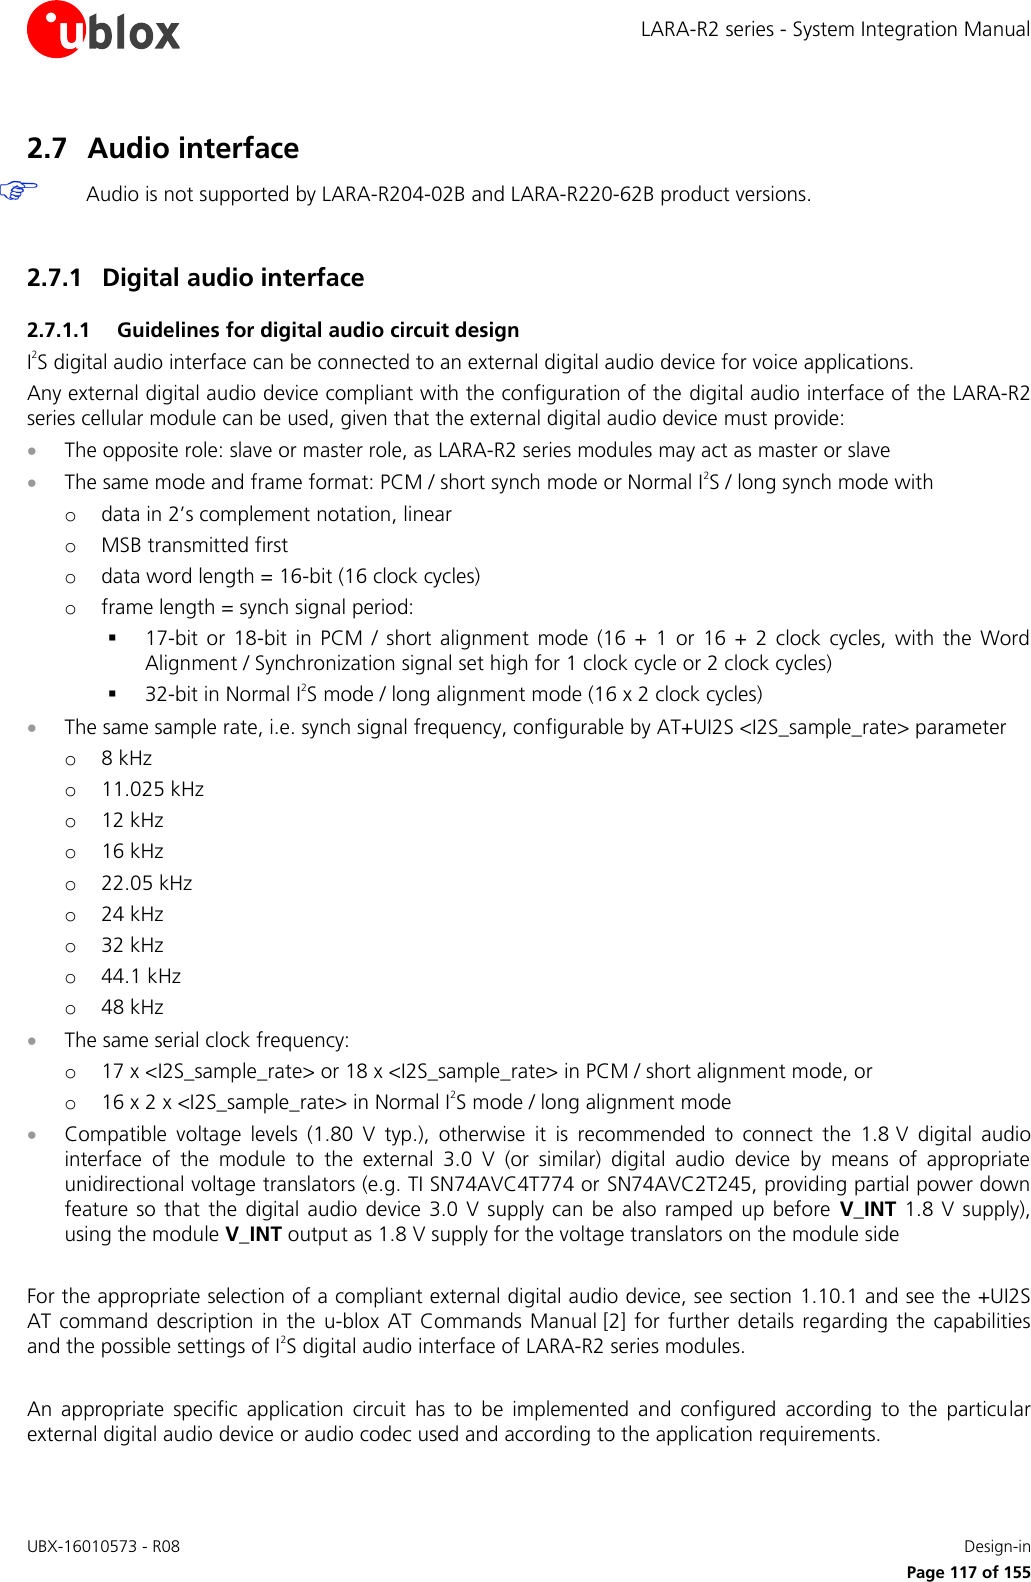 LARA-R2 series - System Integration Manual UBX-16010573 - R08    Design-in     Page 117 of 155 2.7 Audio interface  Audio is not supported by LARA-R204-02B and LARA-R220-62B product versions.  2.7.1 Digital audio interface 2.7.1.1 Guidelines for digital audio circuit design I2S digital audio interface can be connected to an external digital audio device for voice applications.  Any external digital audio device compliant with the configuration of the digital audio interface of the LARA-R2 series cellular module can be used, given that the external digital audio device must provide:  The opposite role: slave or master role, as LARA-R2 series modules may act as master or slave  The same mode and frame format: PCM / short synch mode or Normal I2S / long synch mode with o data in 2’s complement notation, linear o MSB transmitted first o data word length = 16-bit (16 clock cycles) o frame length = synch signal period:  17-bit  or  18-bit  in  PCM  /  short  alignment  mode  (16  +  1  or  16  +  2  clock  cycles,  with  the  Word Alignment / Synchronization signal set high for 1 clock cycle or 2 clock cycles)  32-bit in Normal I2S mode / long alignment mode (16 x 2 clock cycles)  The same sample rate, i.e. synch signal frequency, configurable by AT+UI2S &lt;I2S_sample_rate&gt; parameter o 8 kHz o 11.025 kHz o 12 kHz o 16 kHz o 22.05 kHz o 24 kHz o 32 kHz o 44.1 kHz o 48 kHz  The same serial clock frequency: o 17 x &lt;I2S_sample_rate&gt; or 18 x &lt;I2S_sample_rate&gt; in PCM / short alignment mode, or  o 16 x 2 x &lt;I2S_sample_rate&gt; in Normal I2S mode / long alignment mode  Compatible  voltage  levels  (1.80  V  typ.),  otherwise  it  is  recommended  to  connect  the  1.8 V  digital  audio interface  of  the  module  to  the  external  3.0  V  (or  similar)  digital  audio  device  by  means  of  appropriate unidirectional voltage translators (e.g. TI SN74AVC4T774 or SN74AVC2T245, providing partial power down feature  so  that  the digital audio  device  3.0 V  supply  can  be  also  ramped  up before  V_INT  1.8  V  supply), using the module V_INT output as 1.8 V supply for the voltage translators on the module side   For the appropriate selection of a compliant external digital audio device, see section 1.10.1 and see the +UI2S AT command  description  in  the  u-blox  AT  Commands  Manual [2]  for  further  details regarding  the  capabilities and the possible settings of I2S digital audio interface of LARA-R2 series modules.  An  appropriate  specific  application  circuit  has  to  be  implemented  and  configured  according  to  the  particular external digital audio device or audio codec used and according to the application requirements.  